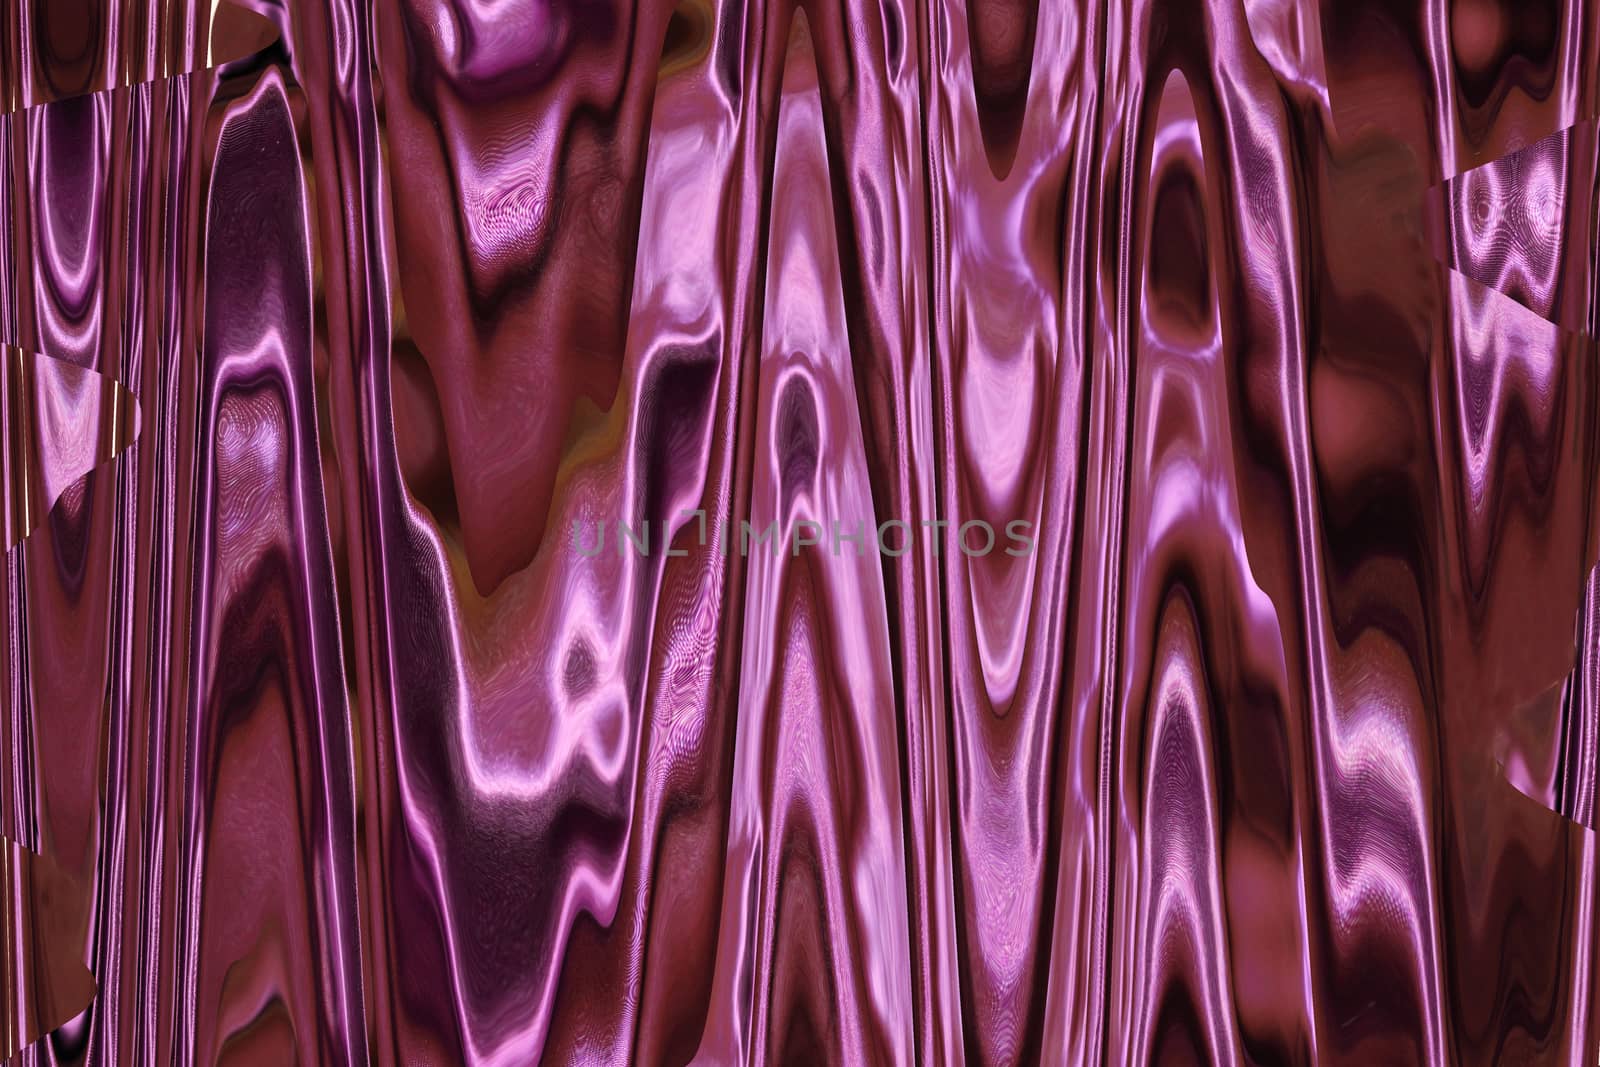 unusual abstract violet texture with light strips